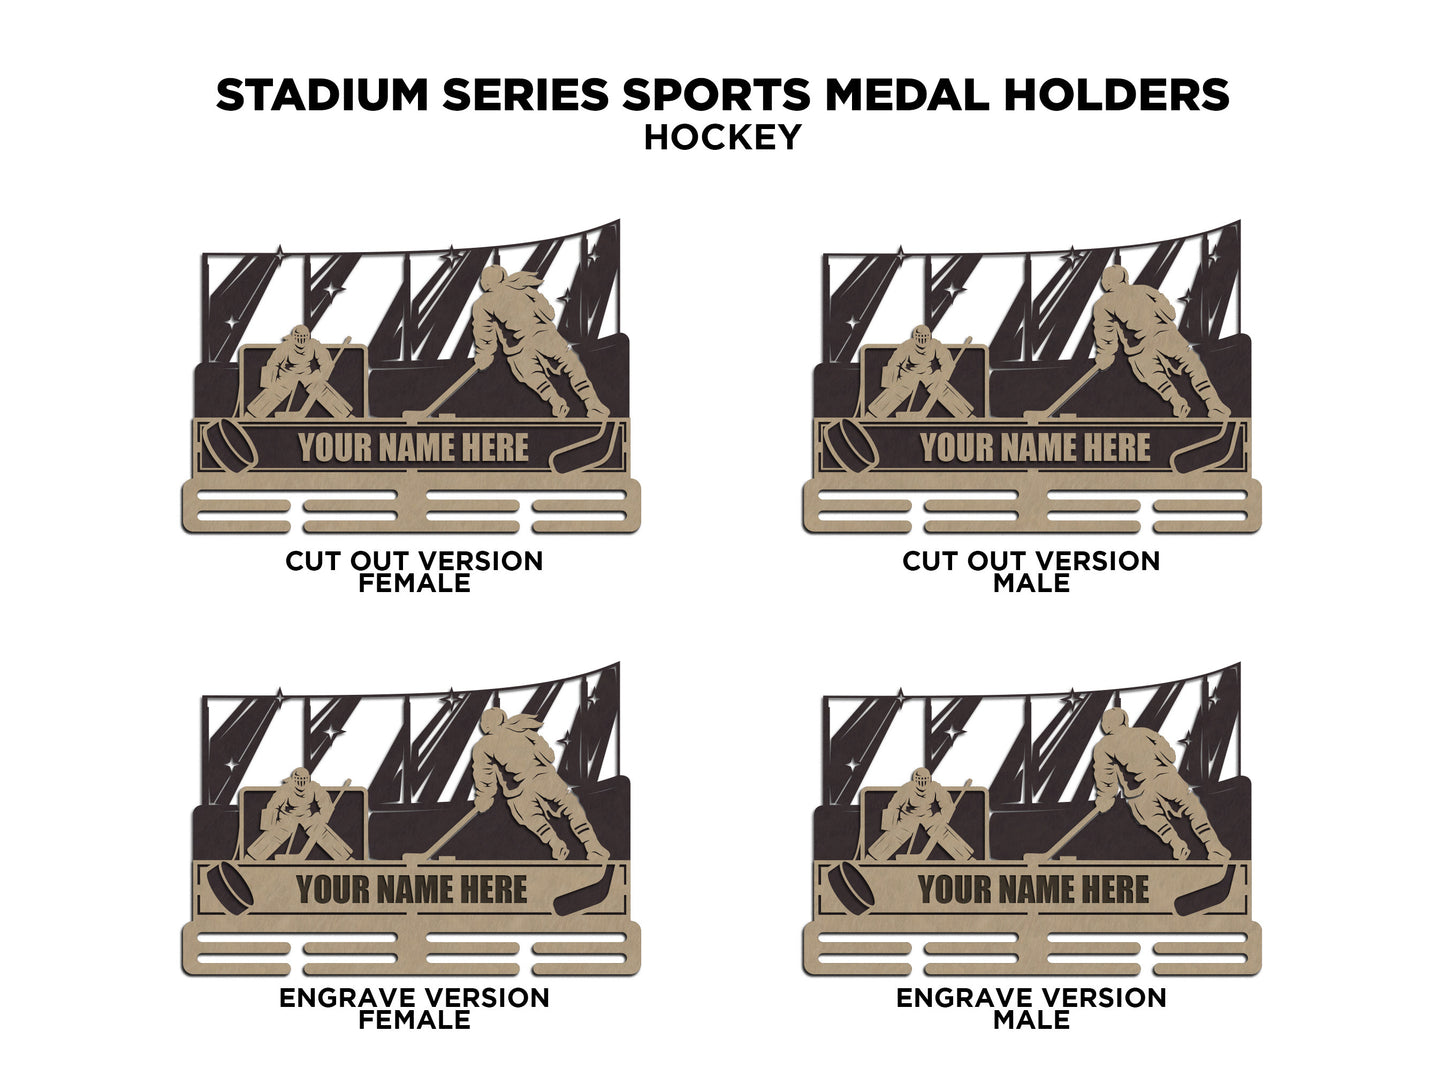 Stadium Series Medal Holders - Hockey - Male and Female Versions Included - SVG Files - Sized for Glowforge